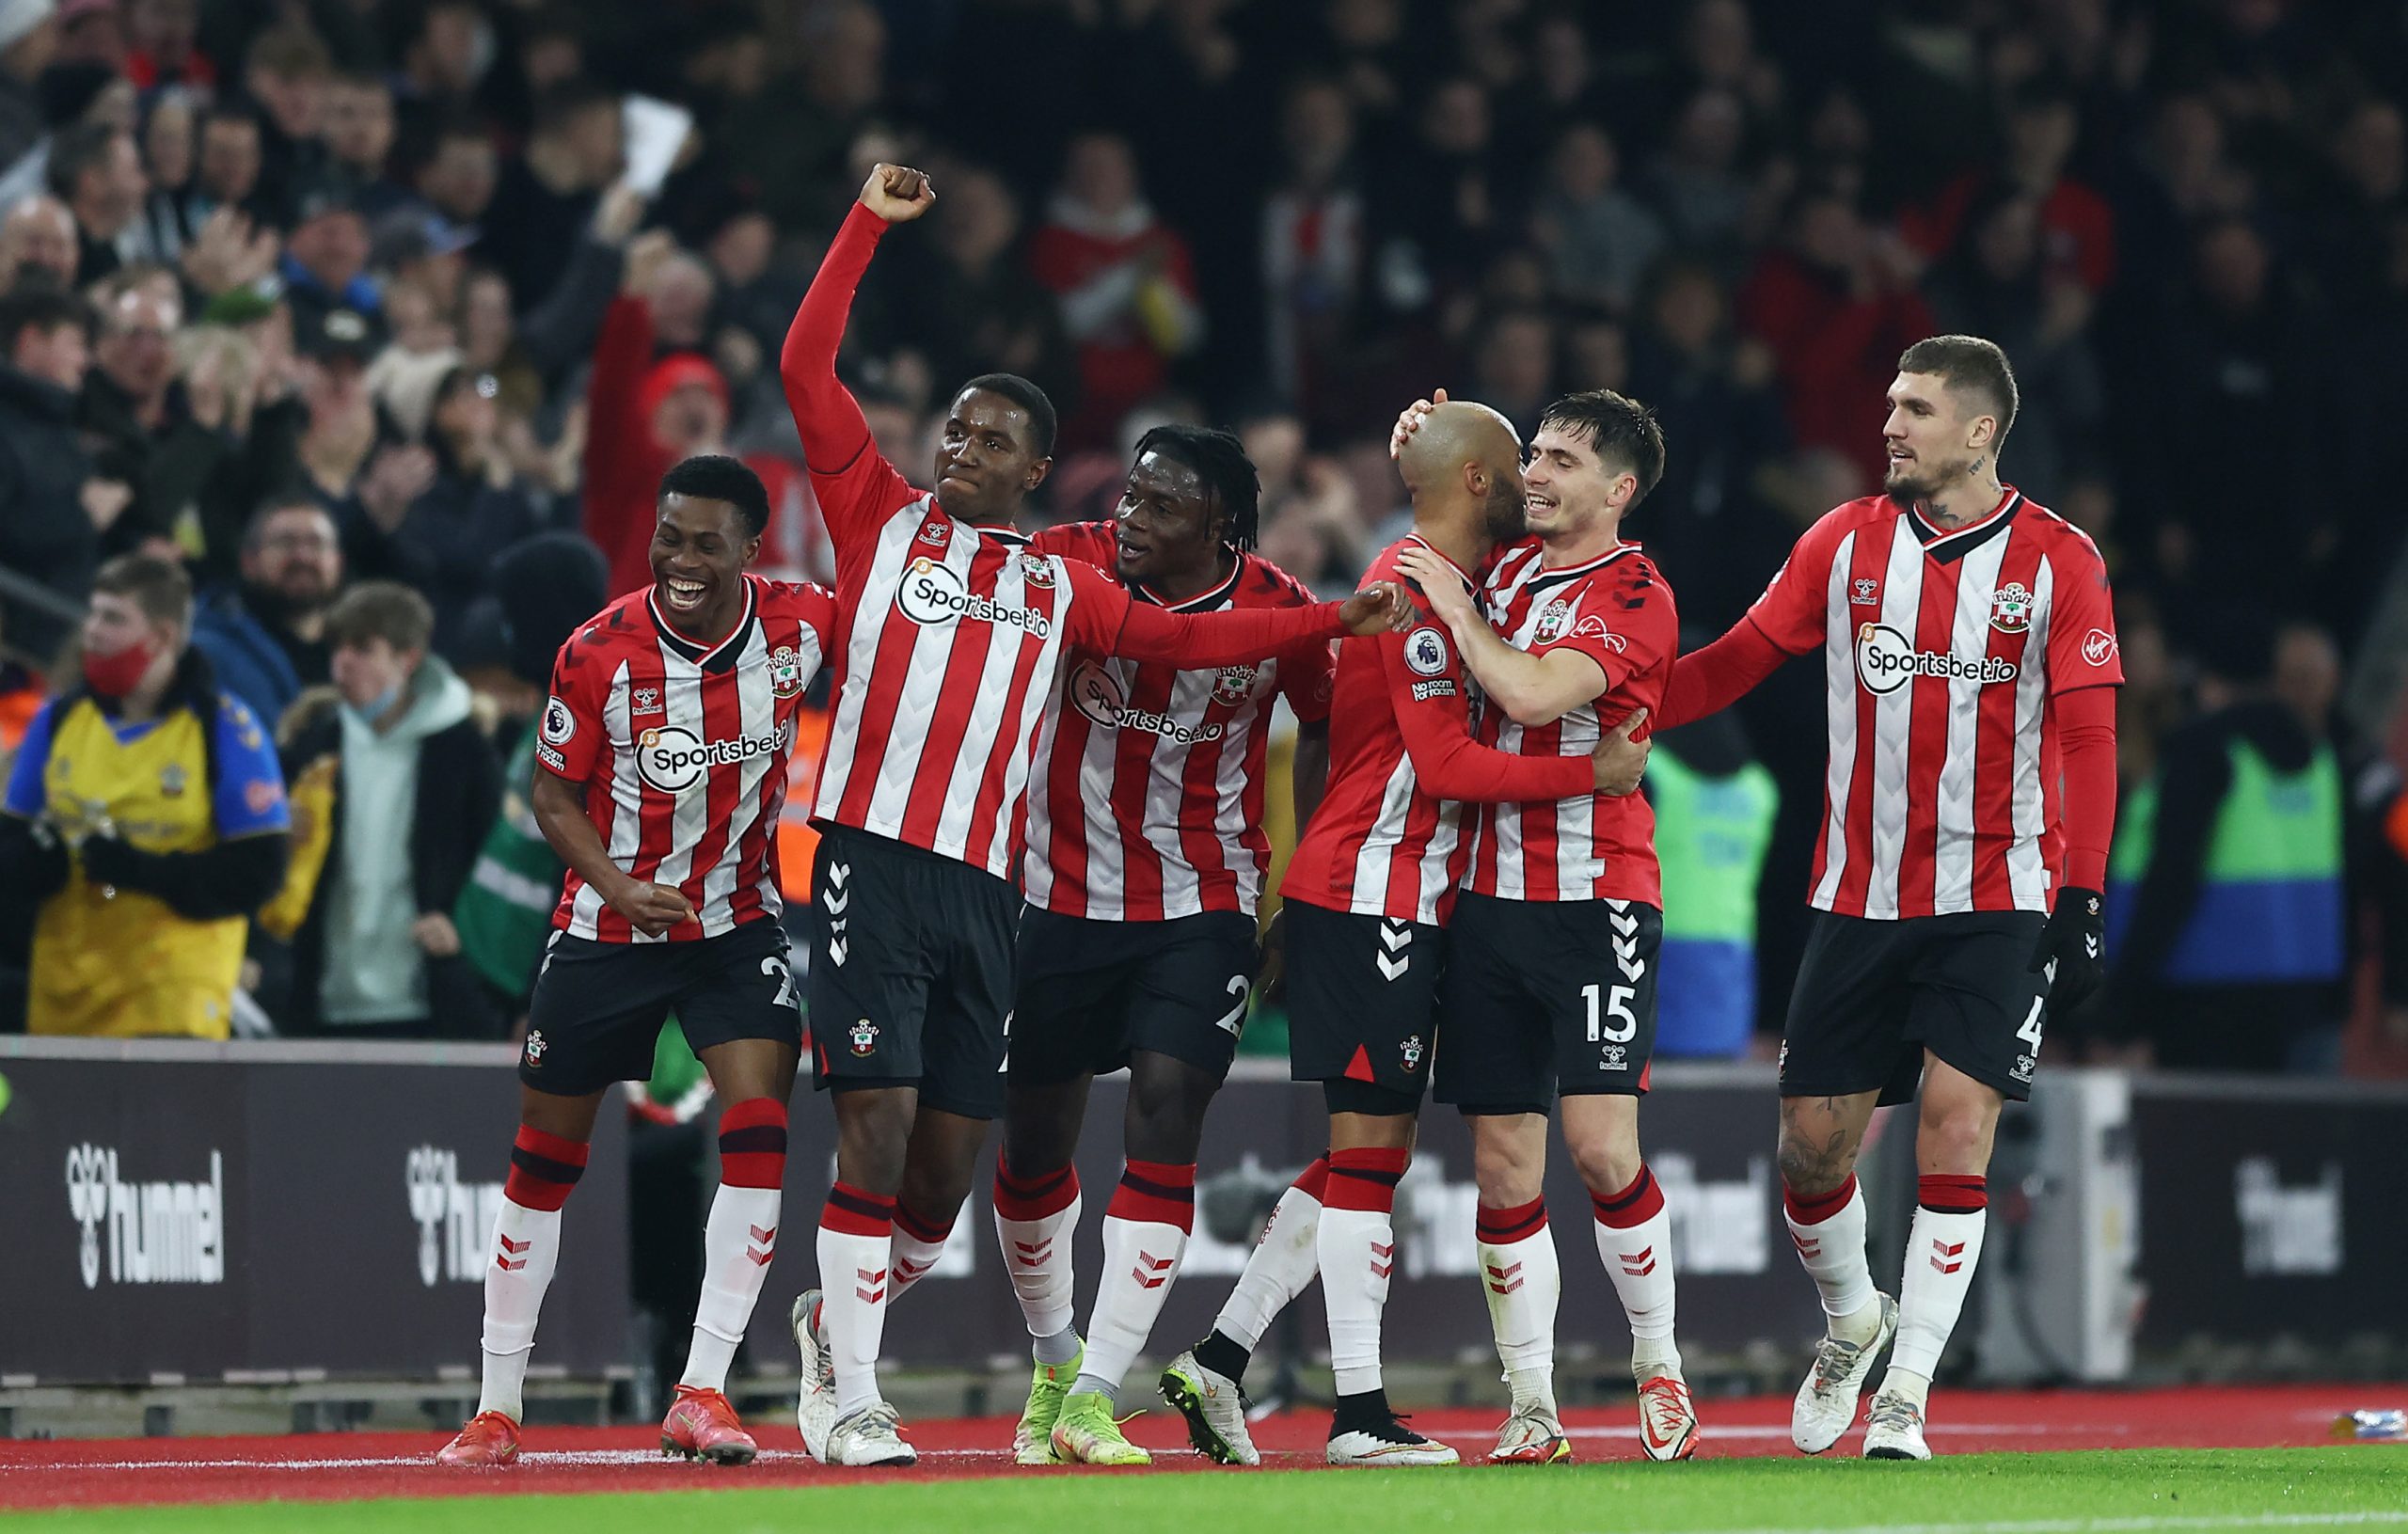 Great victory for Southampton